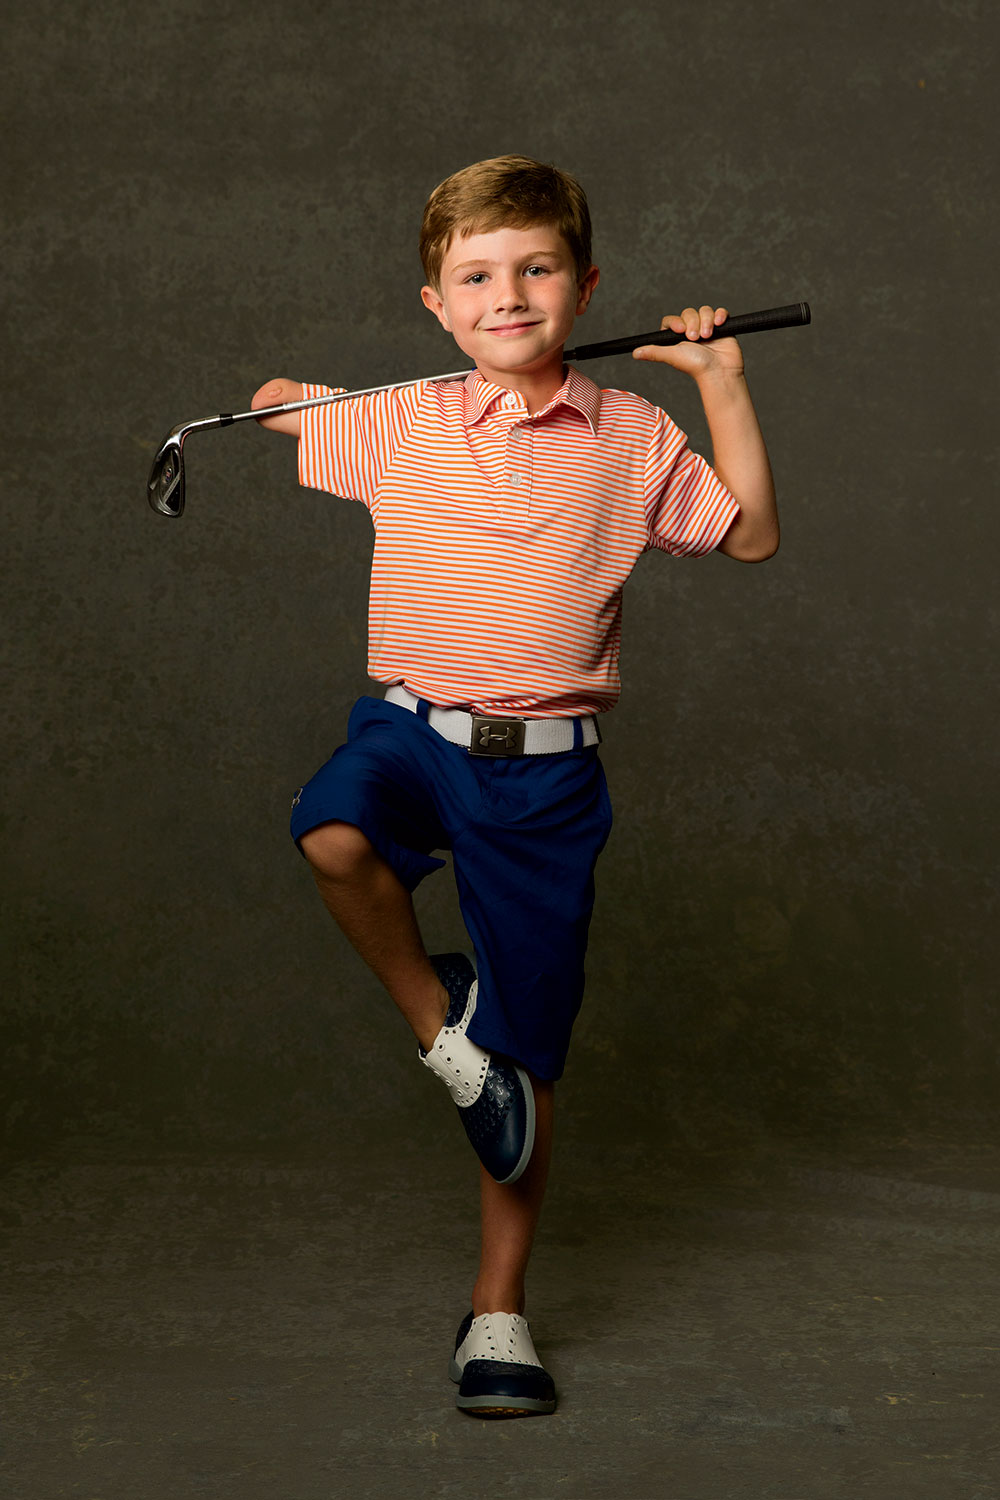 Tommy Morrissey 5 / Palm Beach Gardens, Florida “I met Gary Player, and he told me, ‘it’s all about balance, Tommy!’”